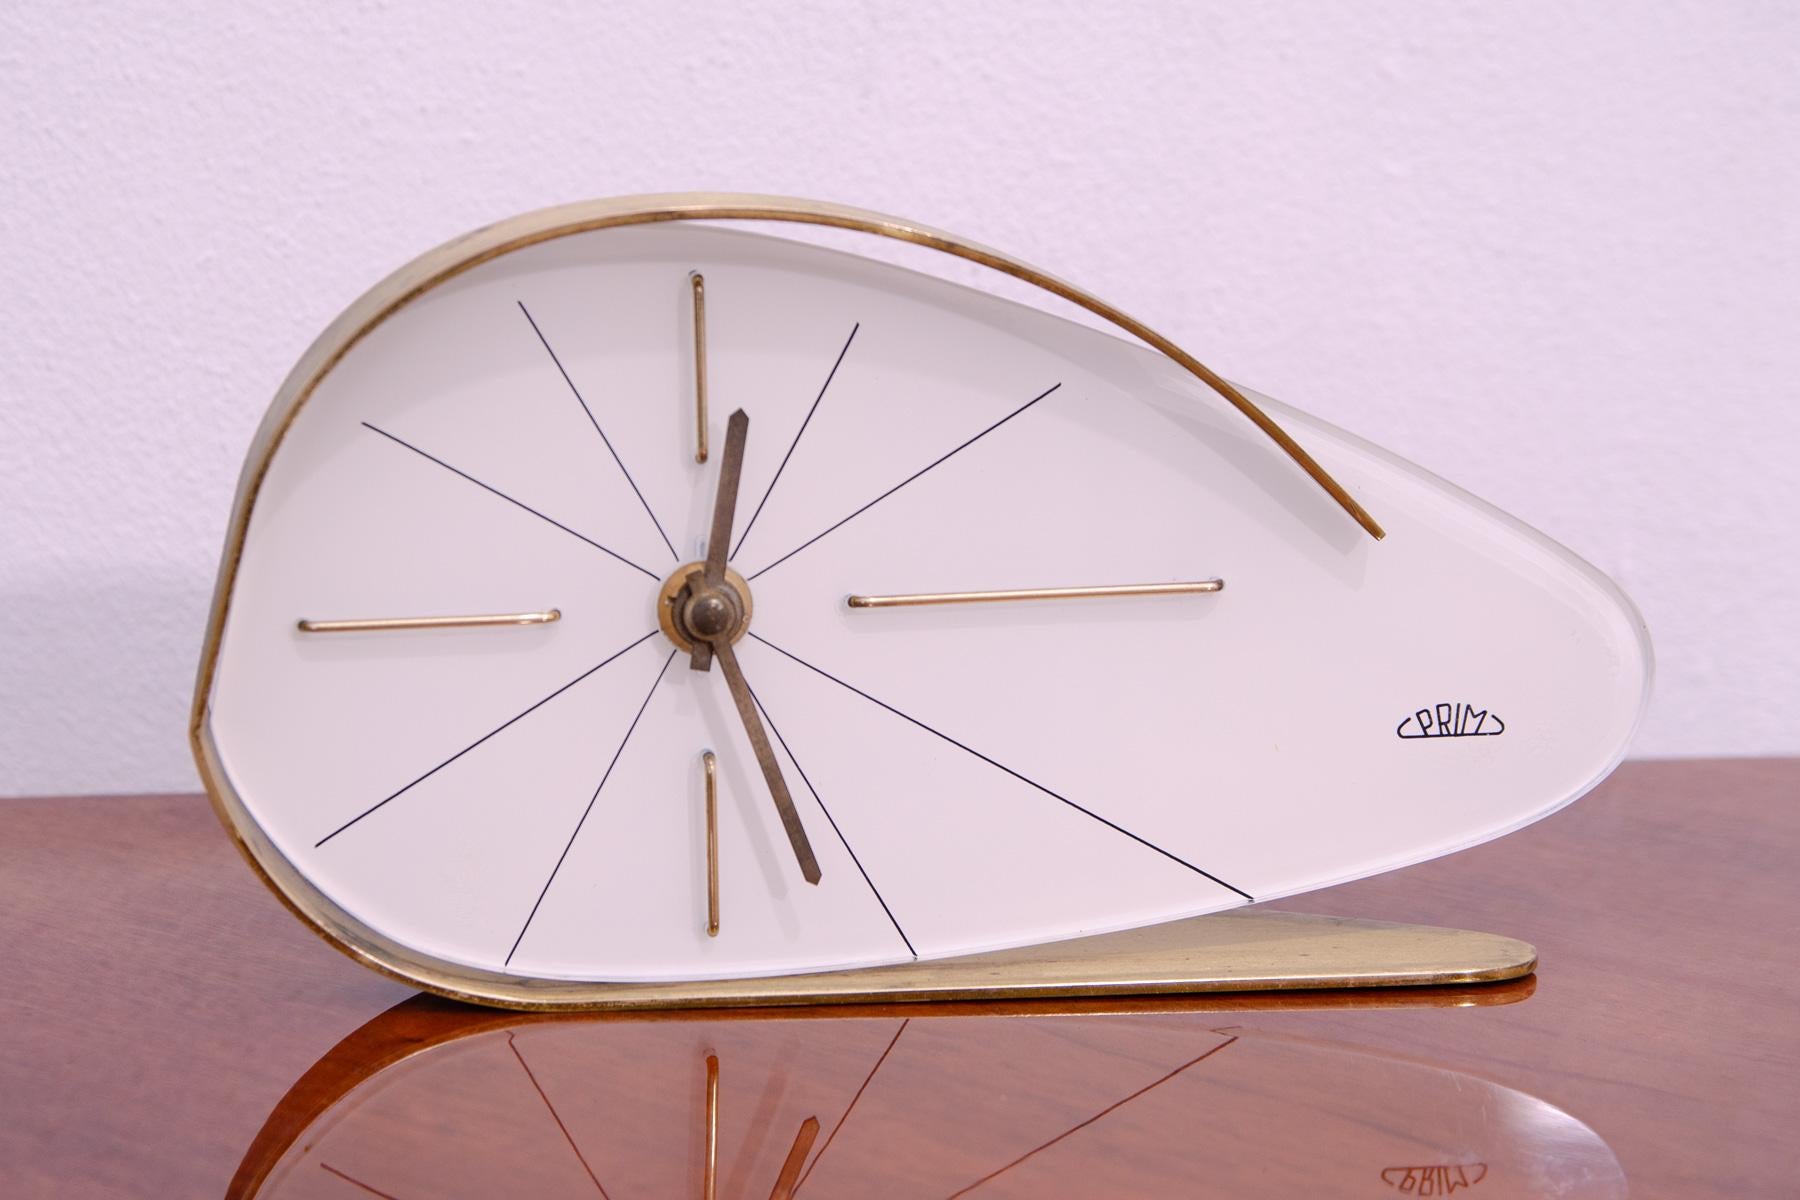 Mid century alarm clock, made in Czechoslovakia by the Prim company in the 1960s. Made in the so-called Brussels style, named after the Brussels EXPO in 1958. This piece is a typical example of this period. In very good condition, fully functional,